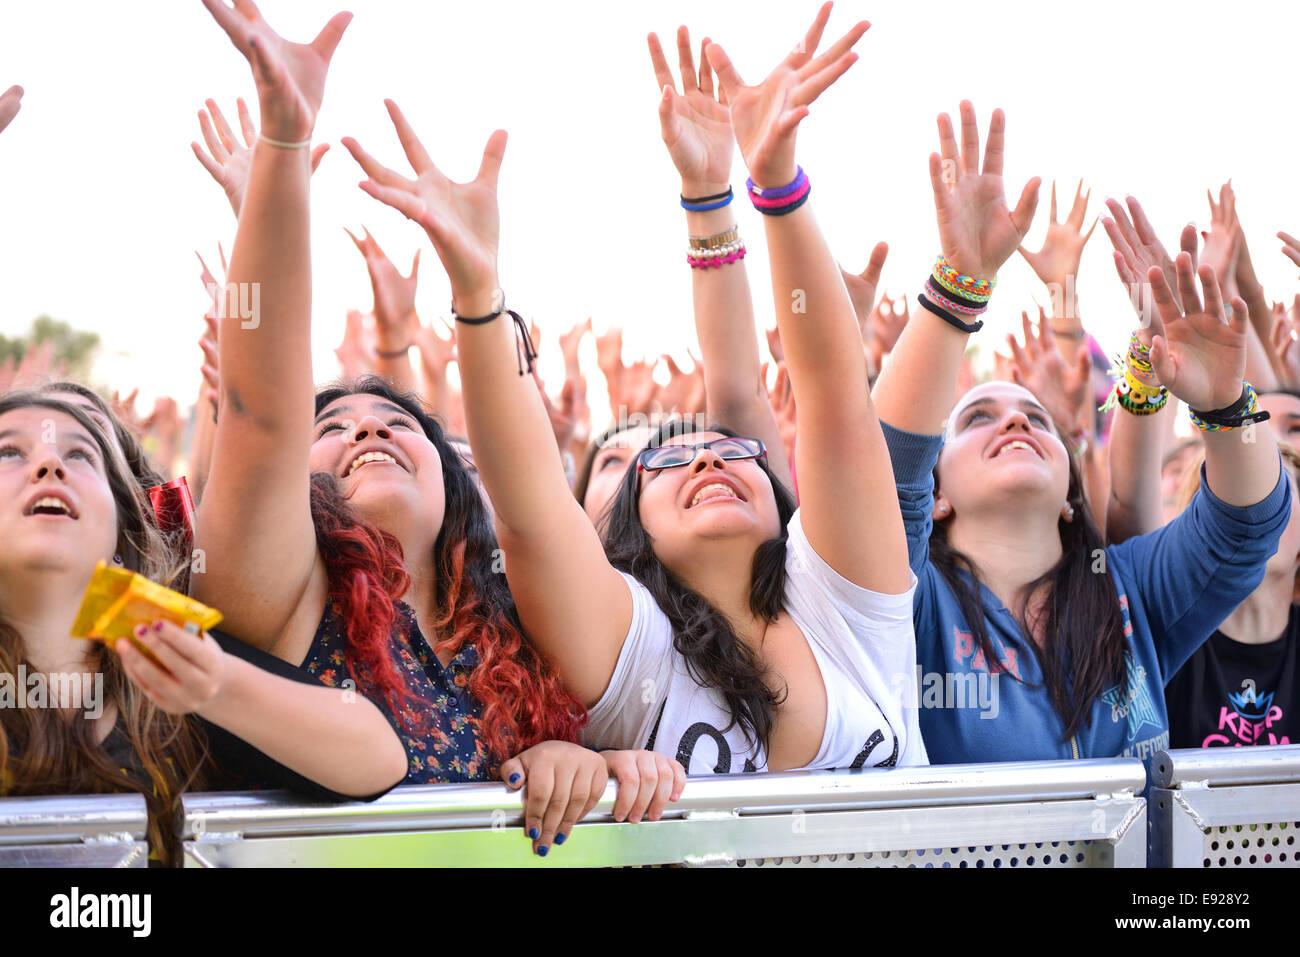 BARCELONA - MAY 23: Girls from the audience in front of the stage, cheering on their idols at the Primavera Pop Festival. Stock Photo